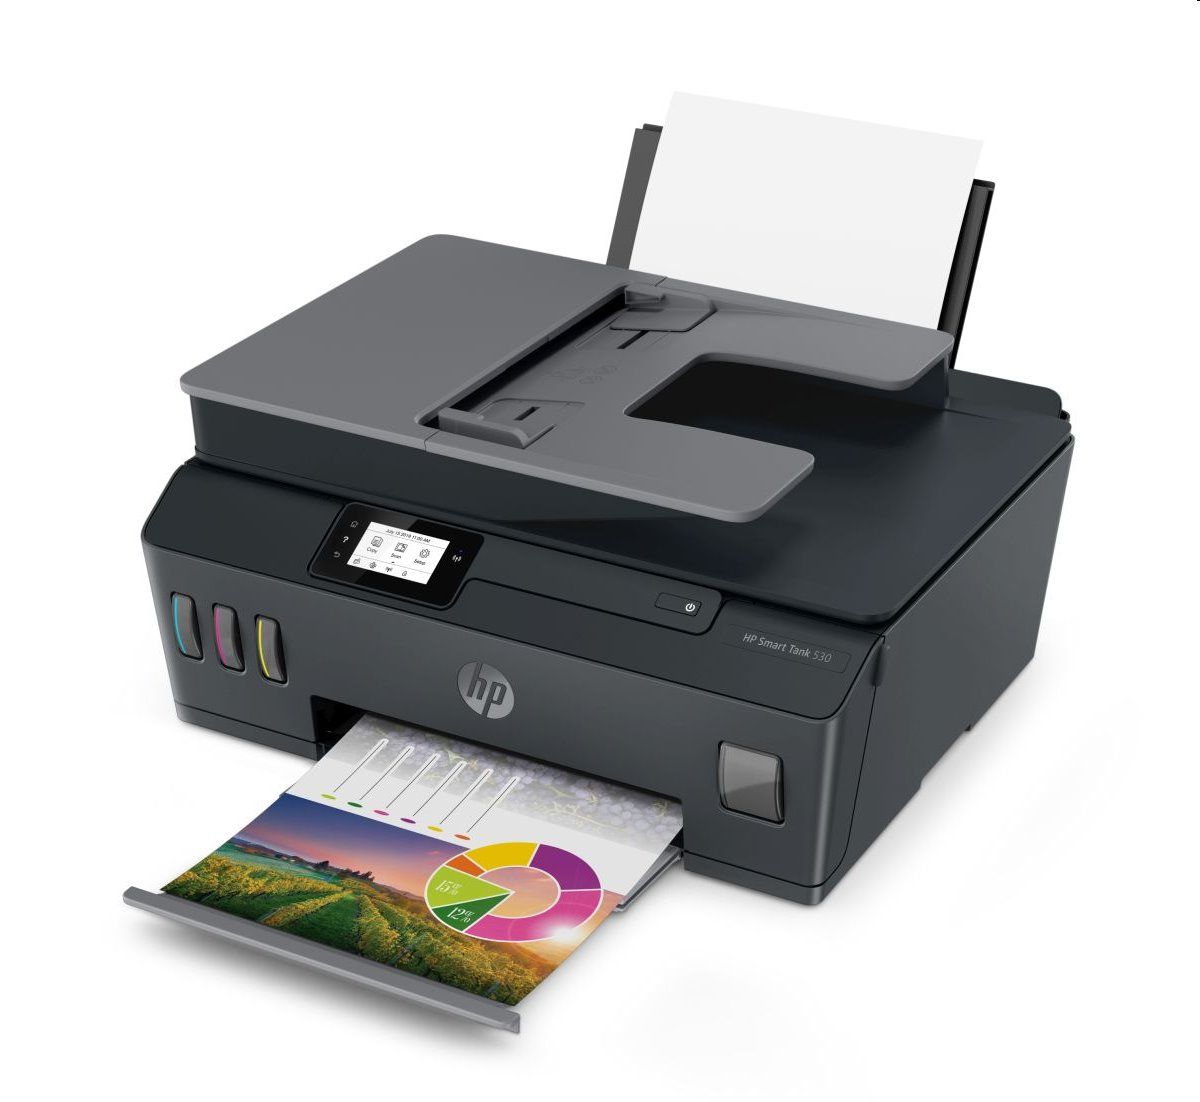 HP Smart Tank 530 All in One Printer 11ppm_2